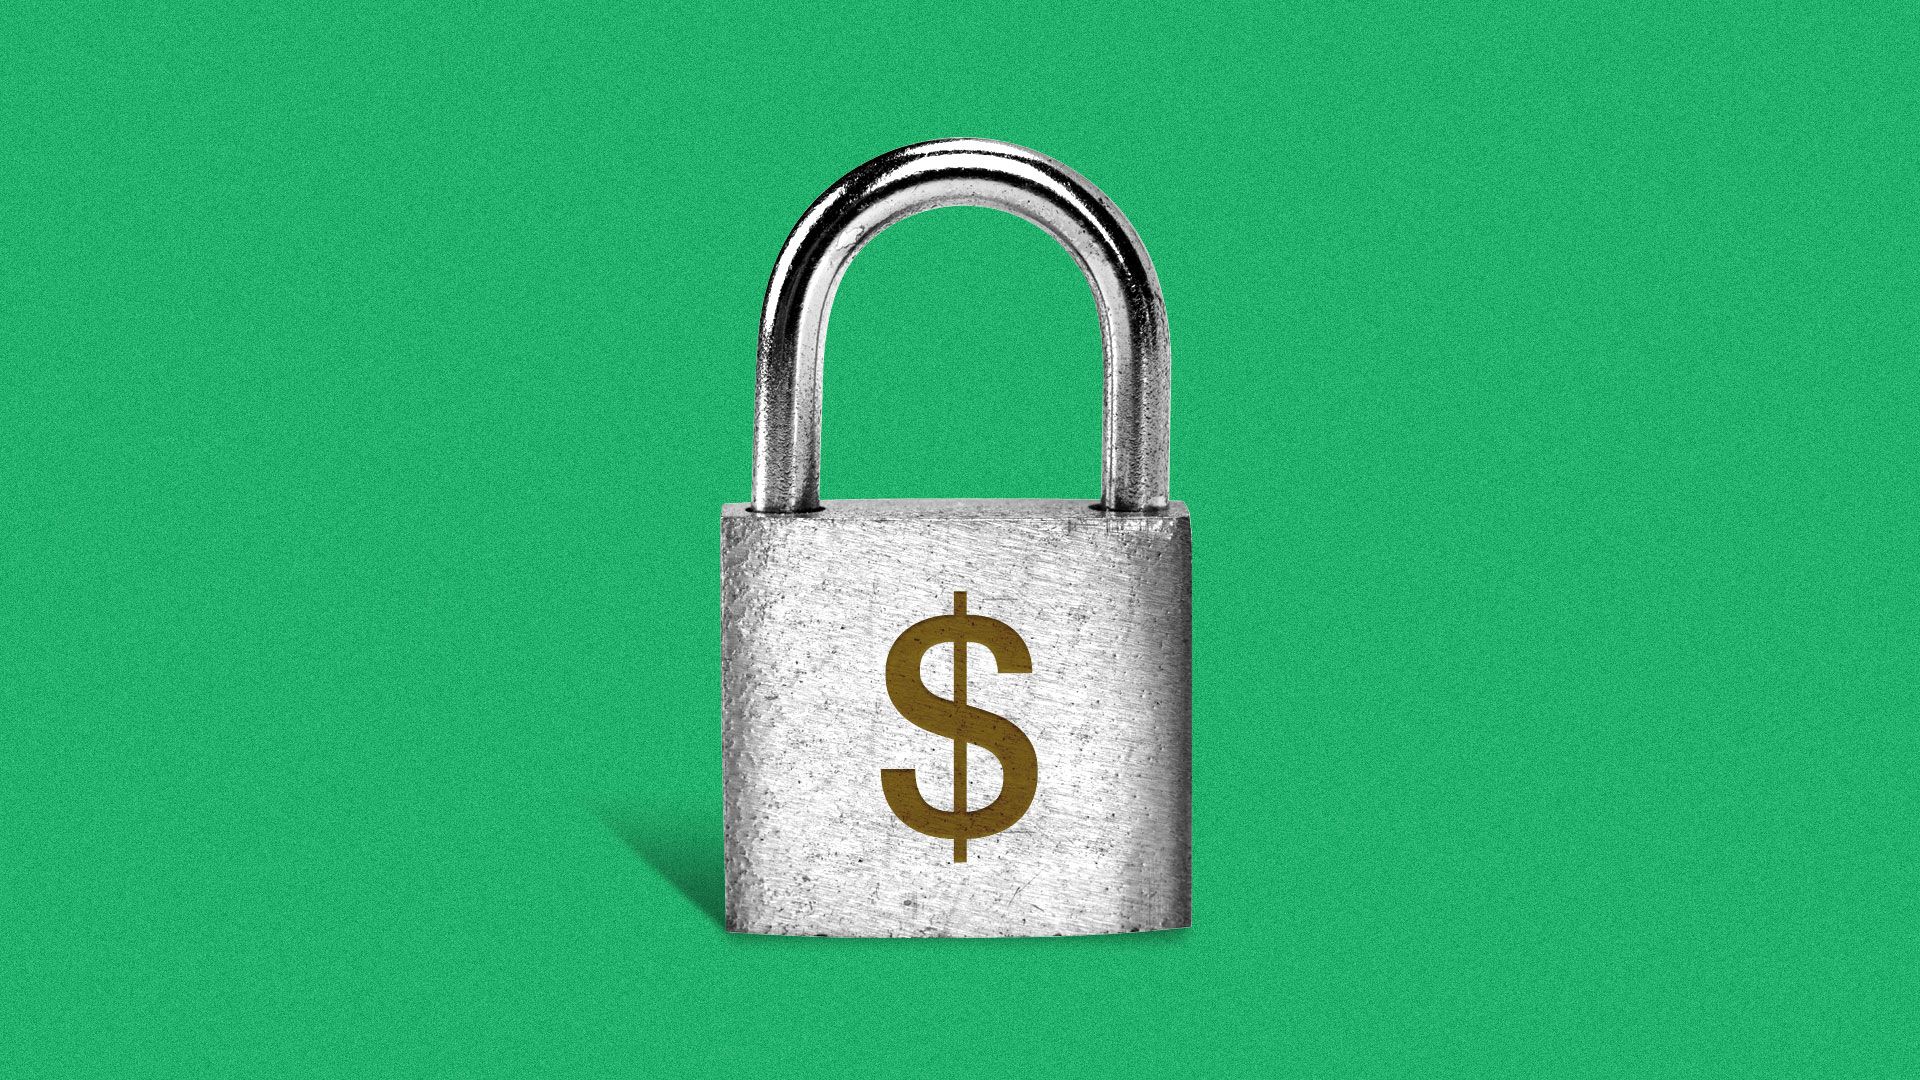 Illustration of a padlock with a dollar sign